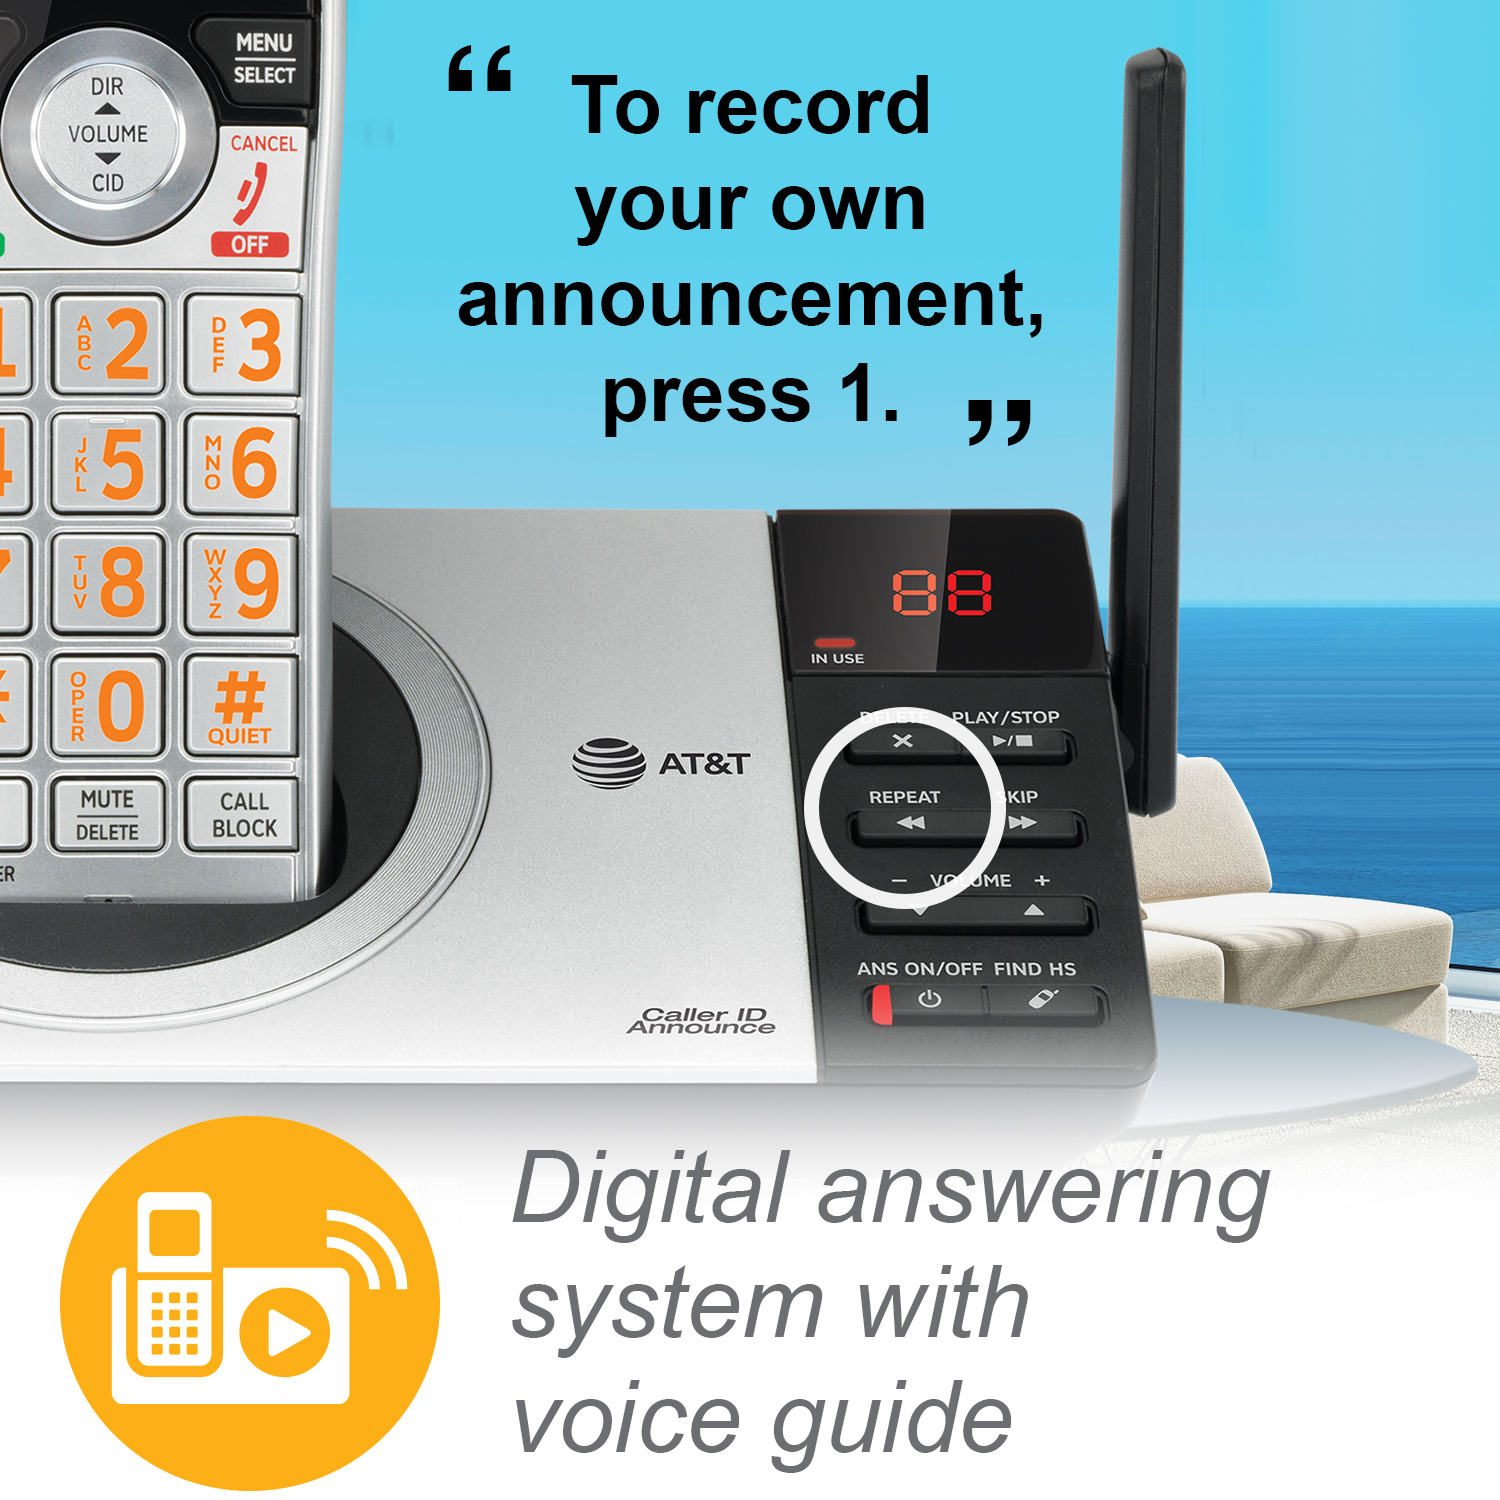 4 handset cordless answering system with smart call blocker - view 8